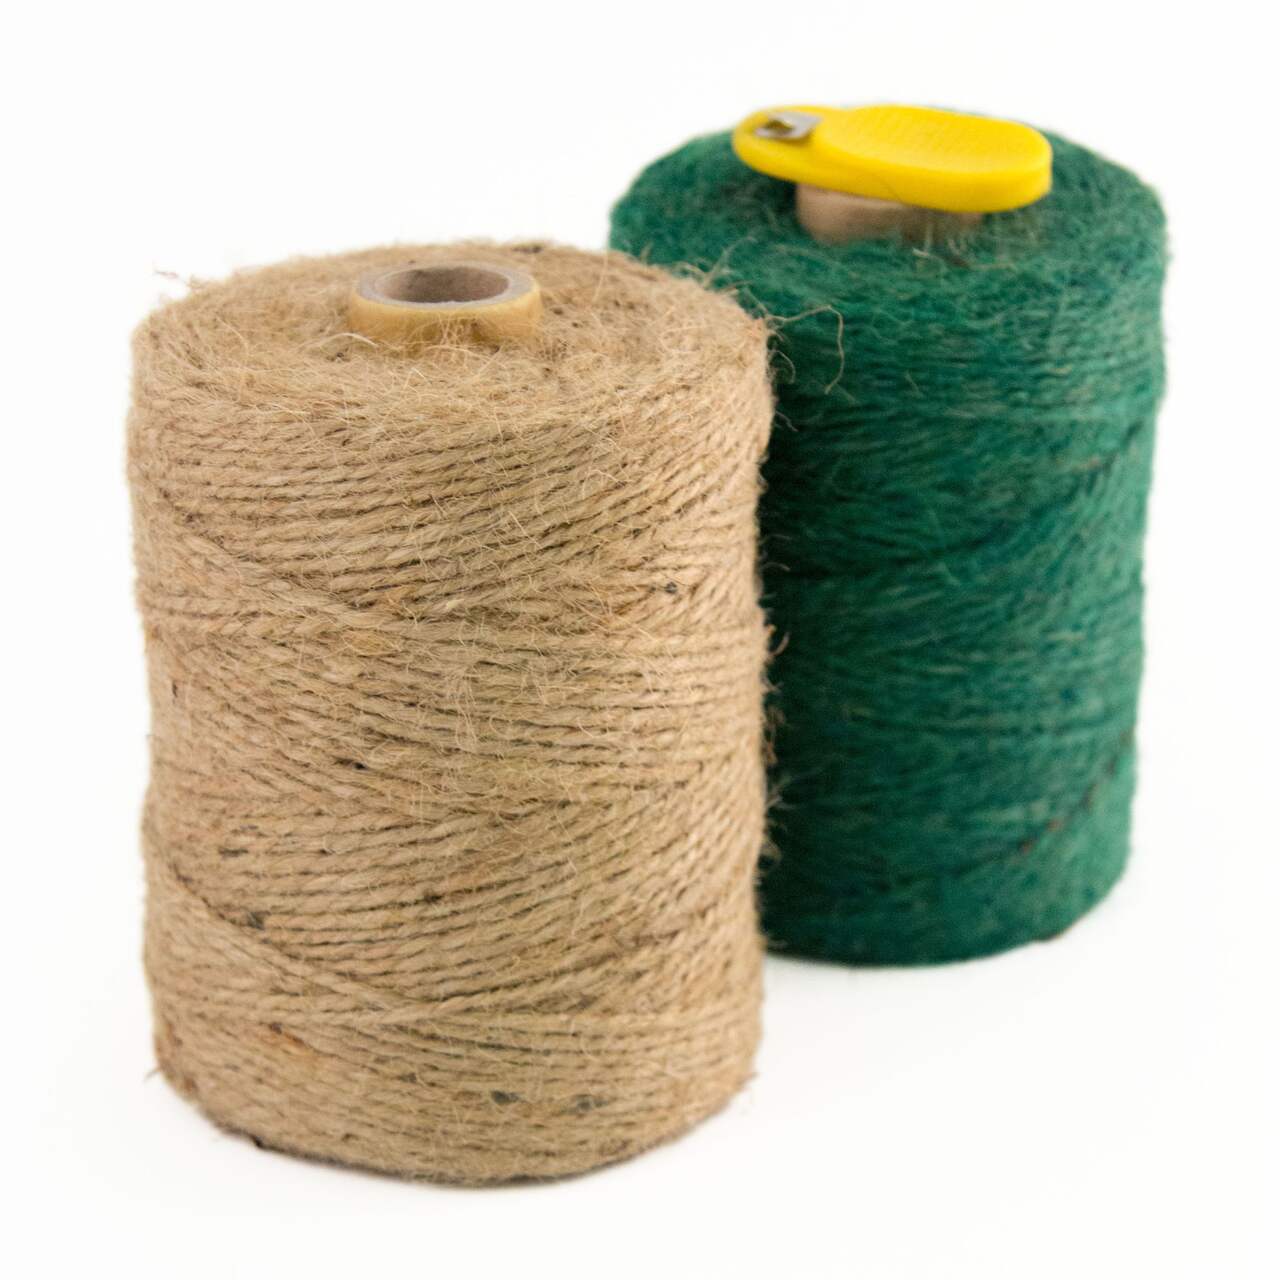 KingCord Jute Twin Pack, For Home and Garden, Twine Cutter